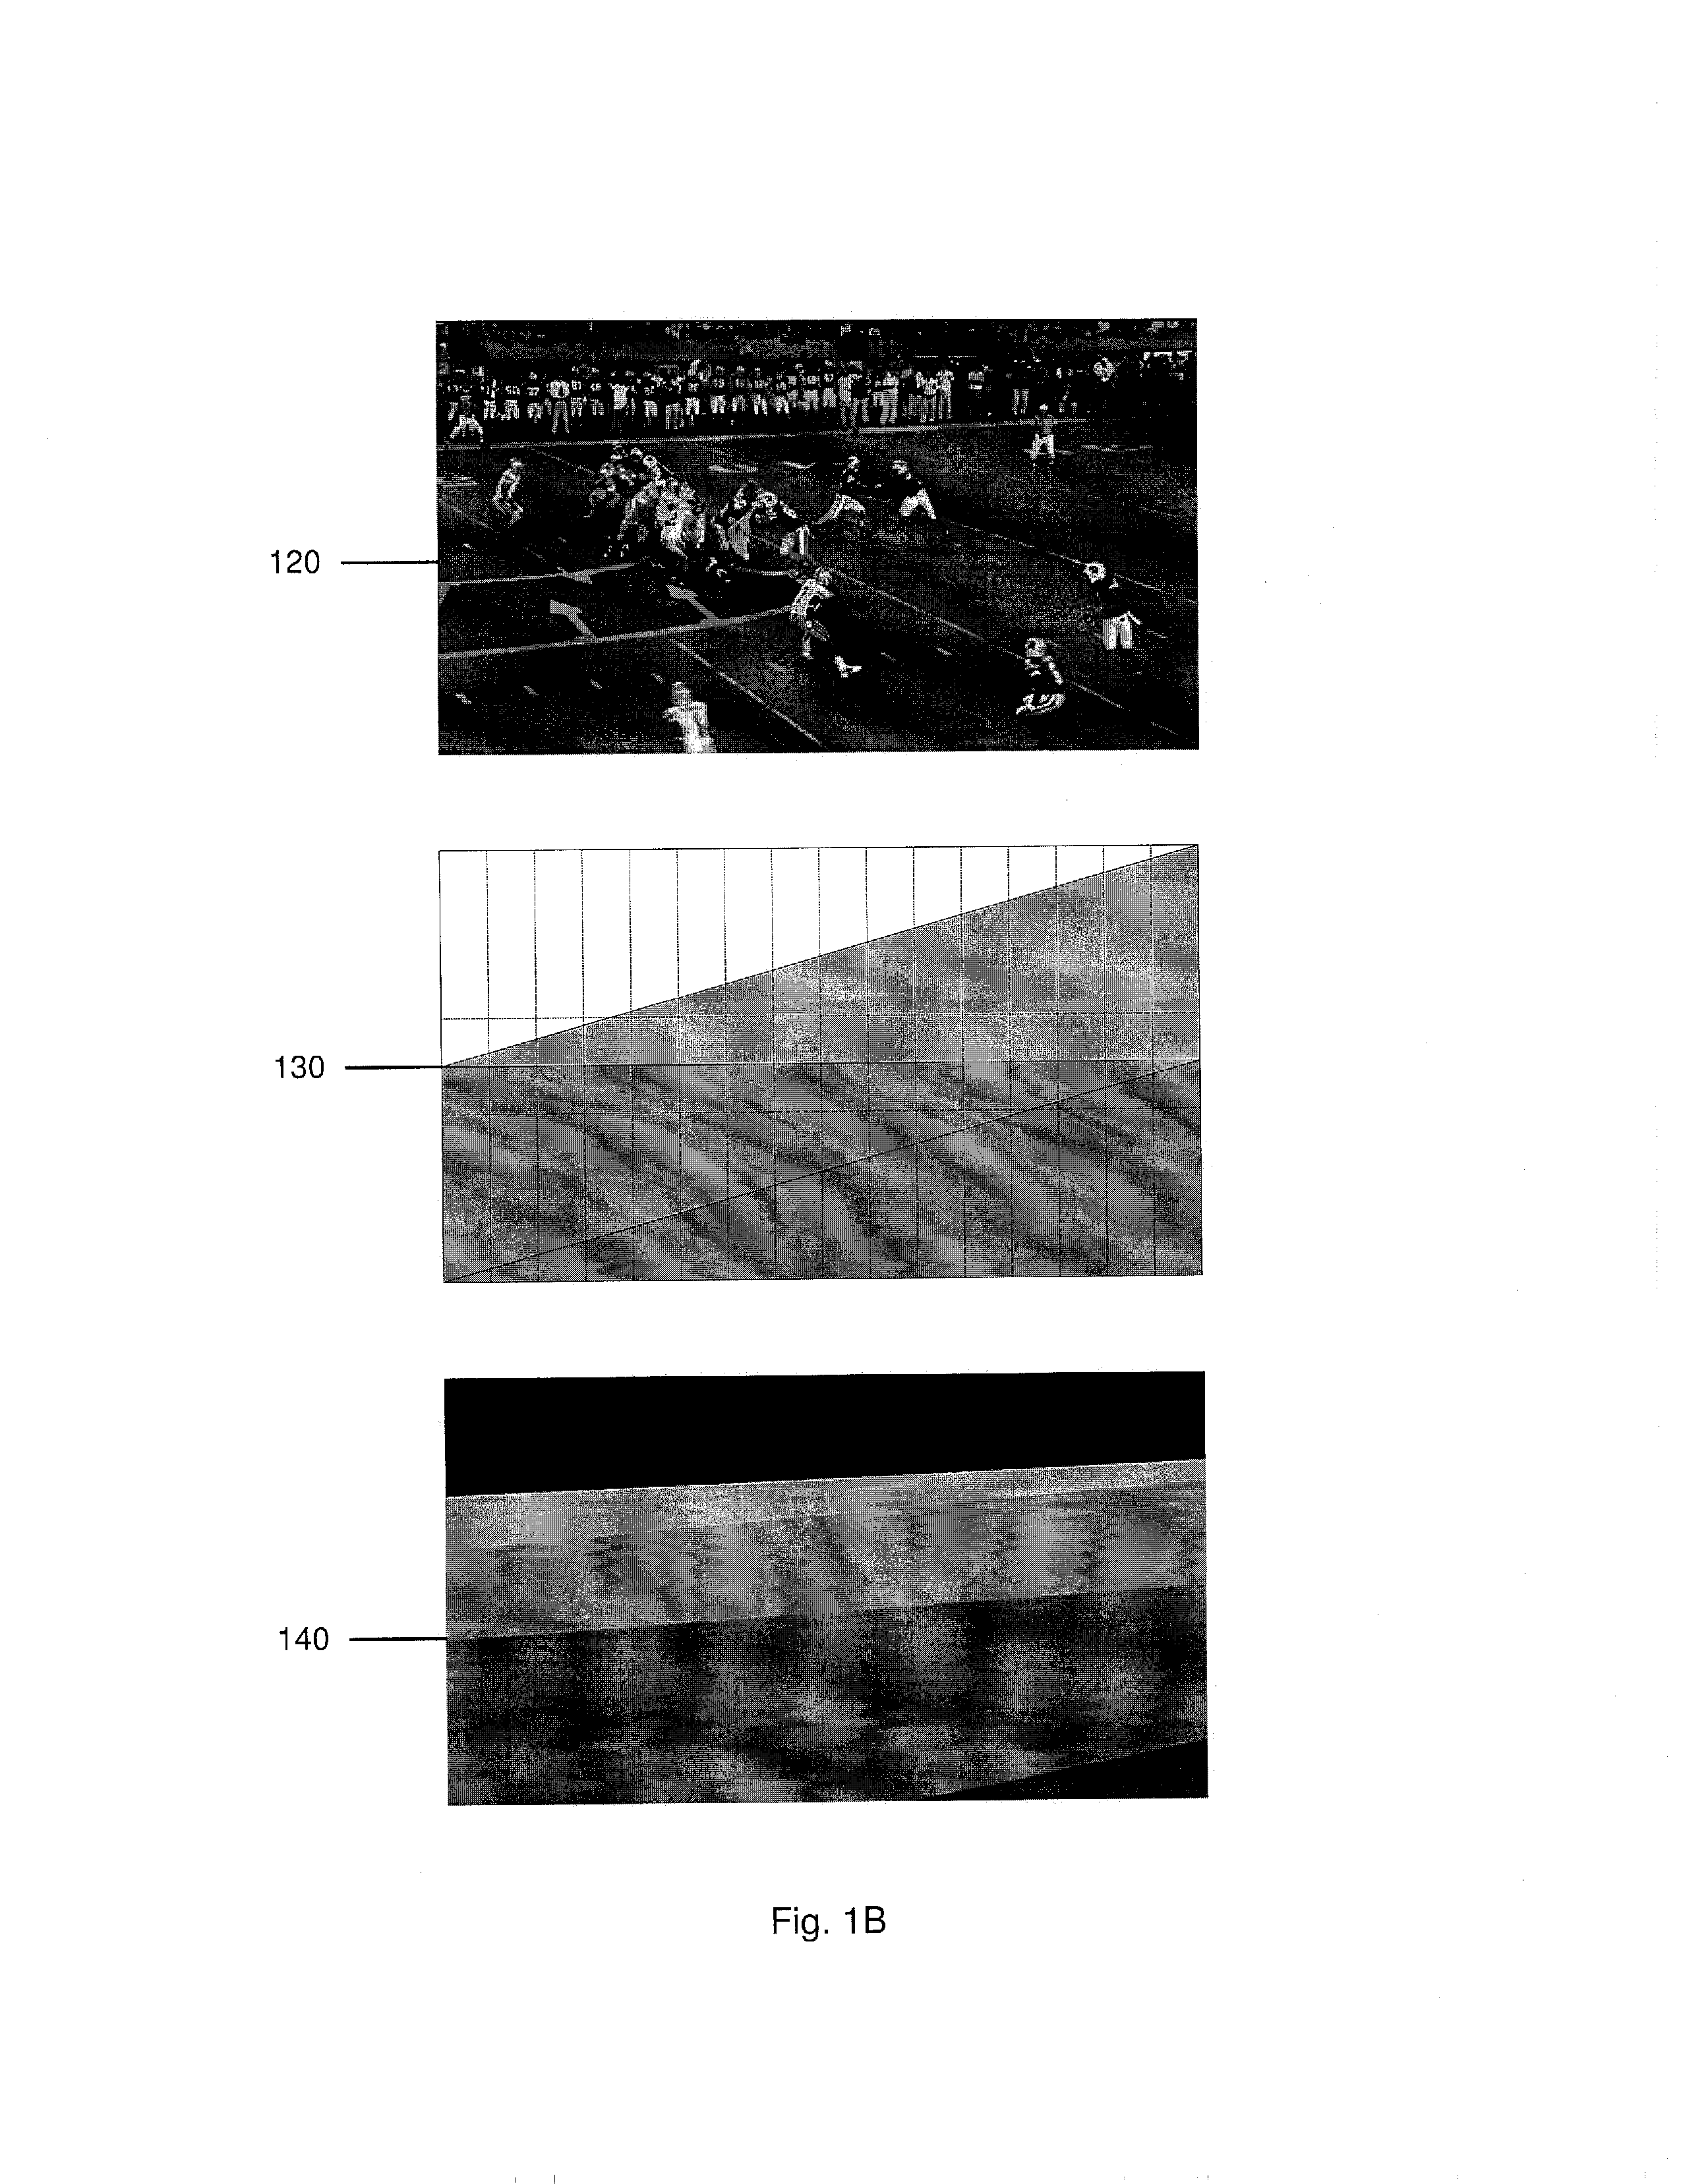 Method And System For Determining Camera Parameters From A Long Range Gradient Based On Alignment Differences In Non-Point Image Landmarks